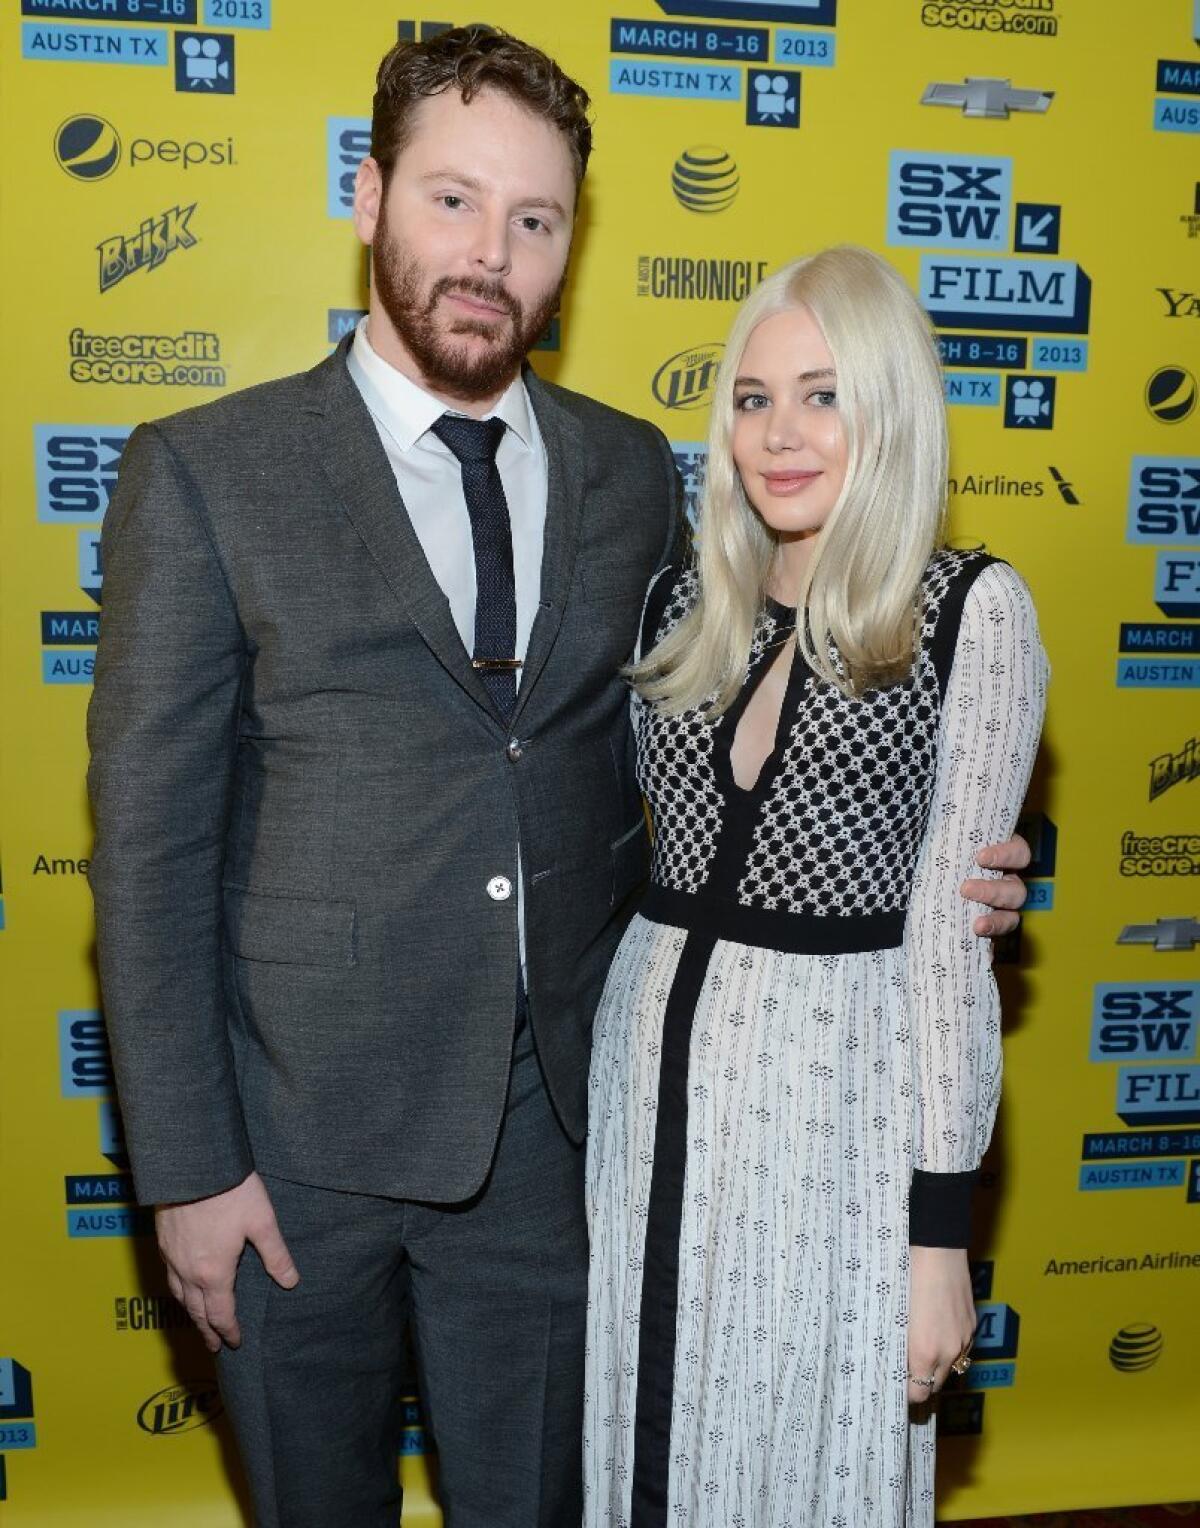 Napster co-founder Sean Parker with his then-fiancee, now his wife, Alexandra Lenas at SXSW in 2013. He has joined other entrepreneurs in launching the Economic Innovation Group.